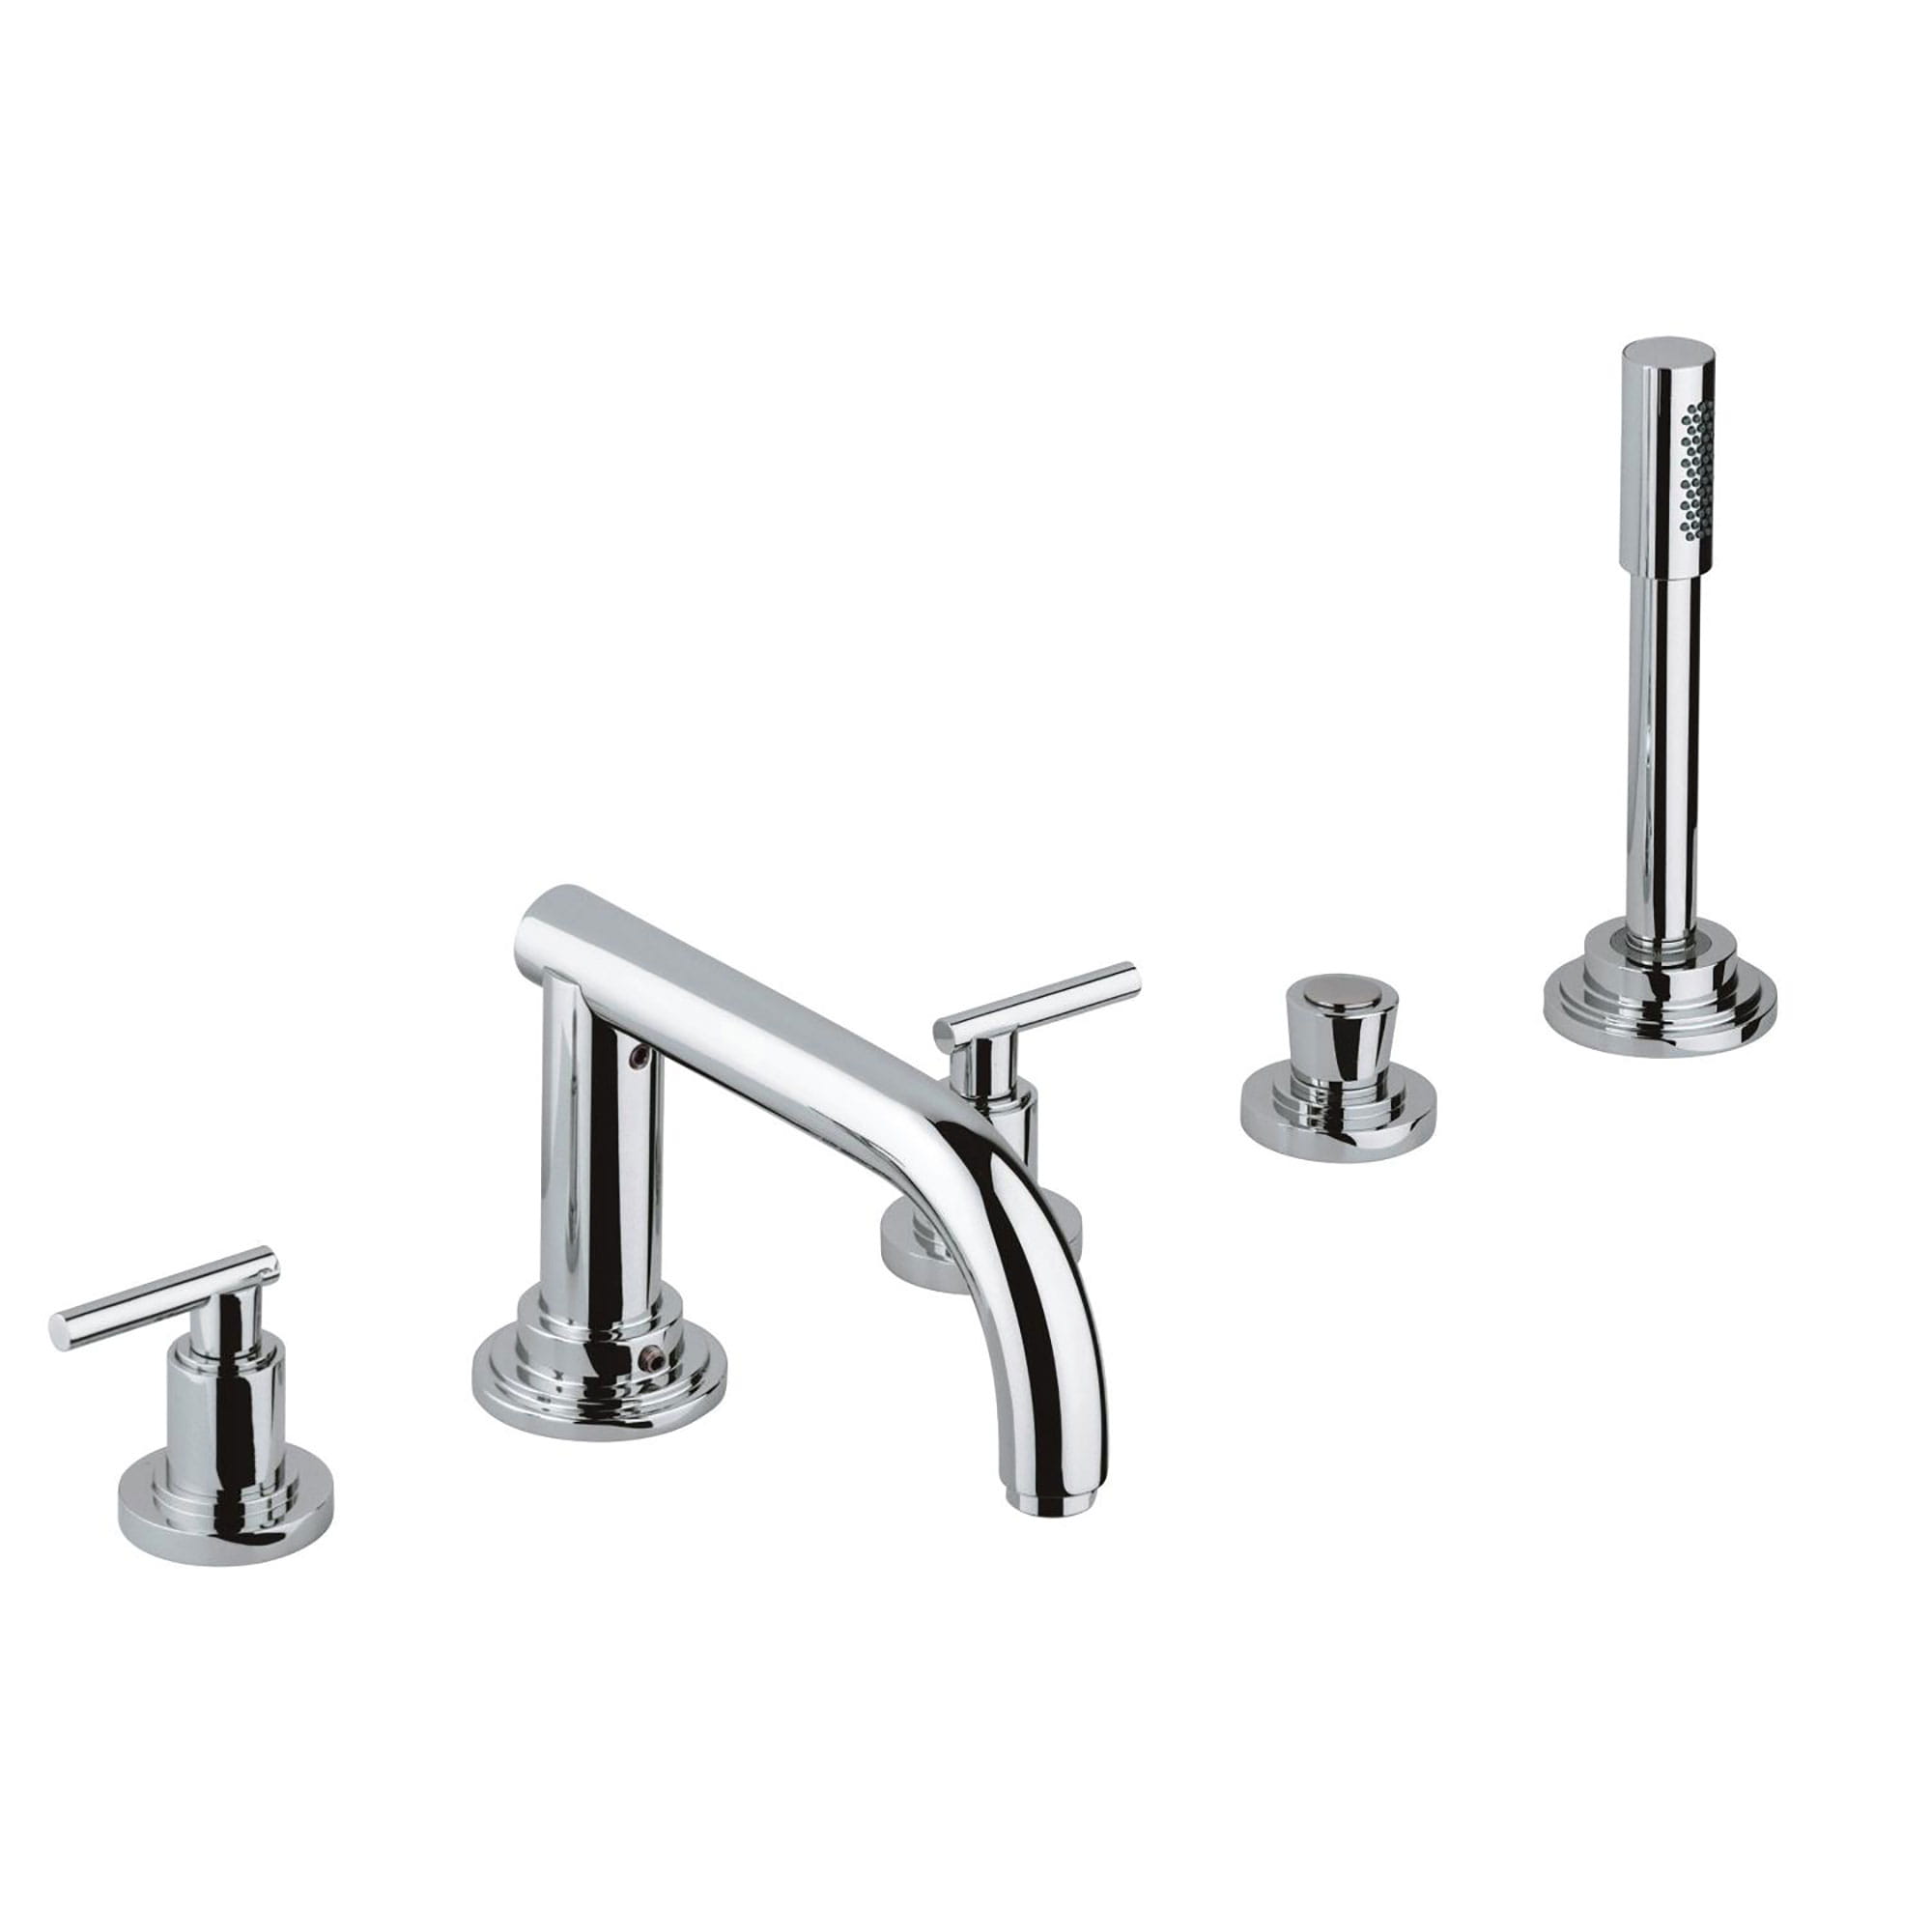 5-Hole 2-Handle Deck Mount Roman Tub Faucet with 2.5 GPM Hand Shower